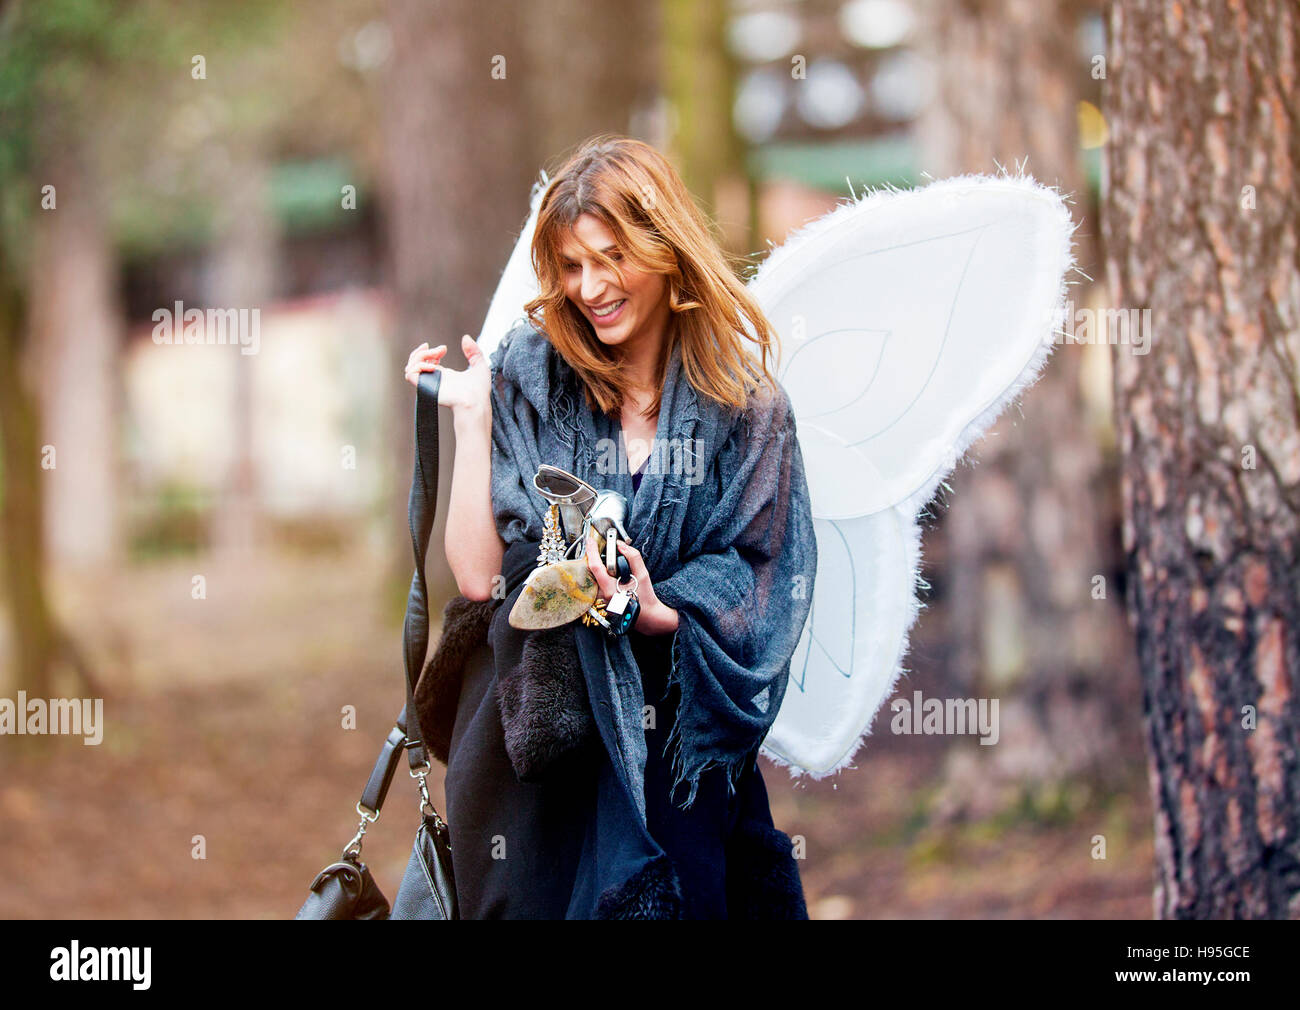 A beautiful happy smiling girl walking through the park with party angel wings and high heels in her hands. Stock Photo